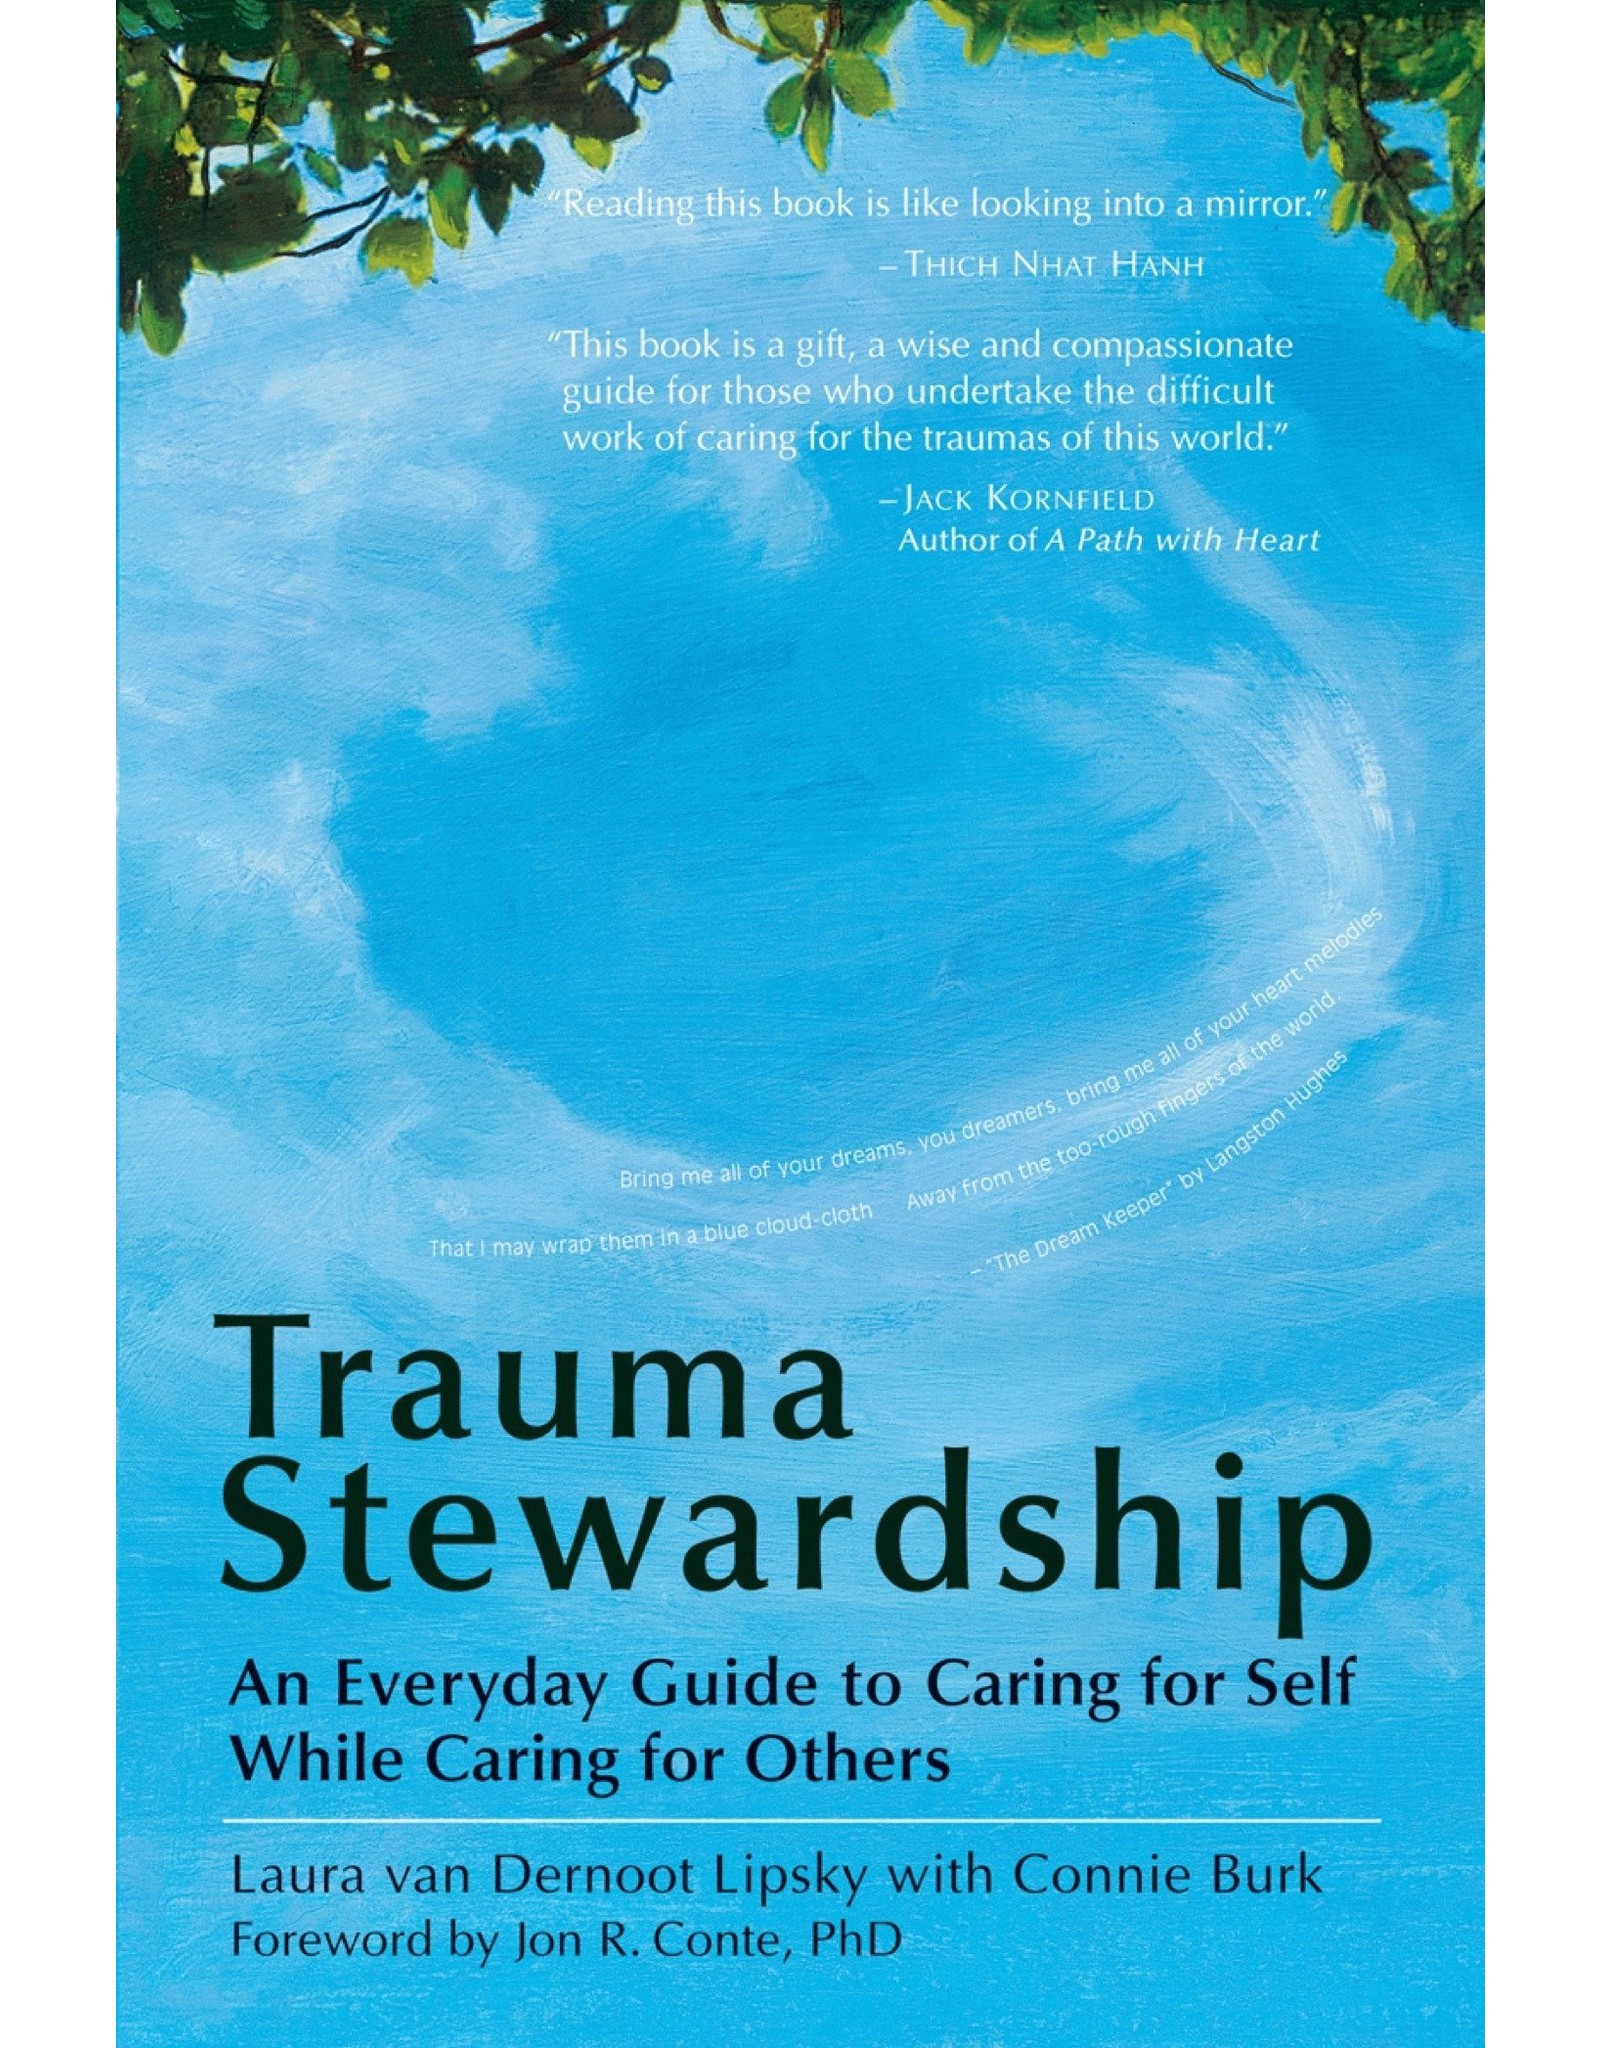 Literature Trauma Stewardship: An Everyday Guide to Caring for Self While Caring for Others